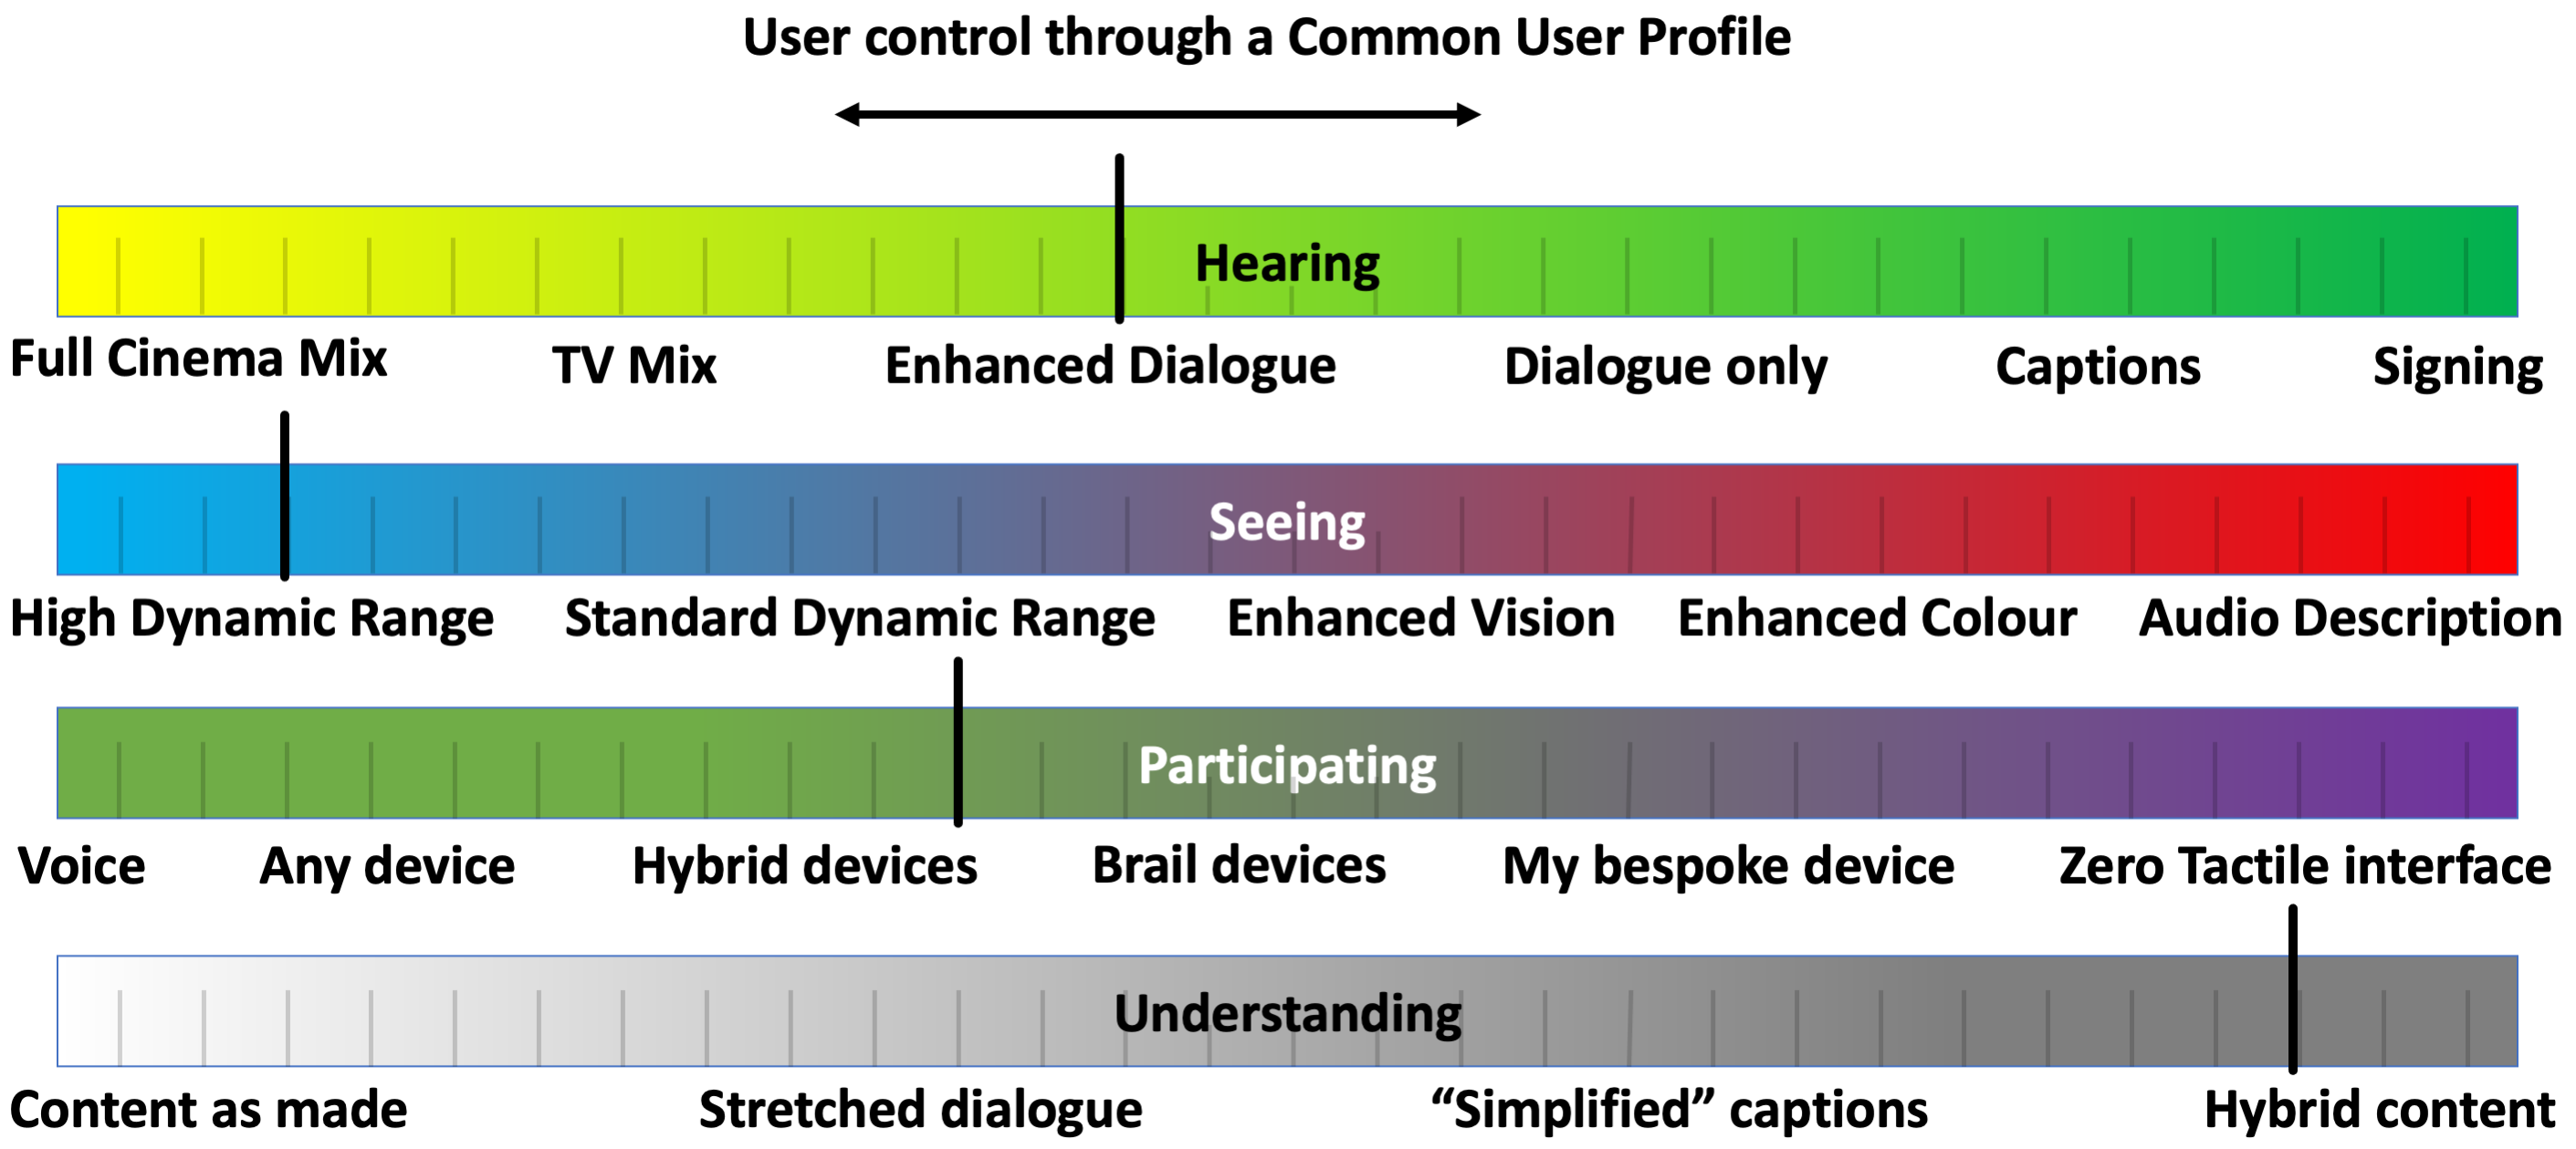 Four horizontal bars labelled Hearing Seeing Participating and Understanding. There is a vertical line indicating the position along each bar a user can select. Under each horizontal bar there are options the user can select to enhance the content